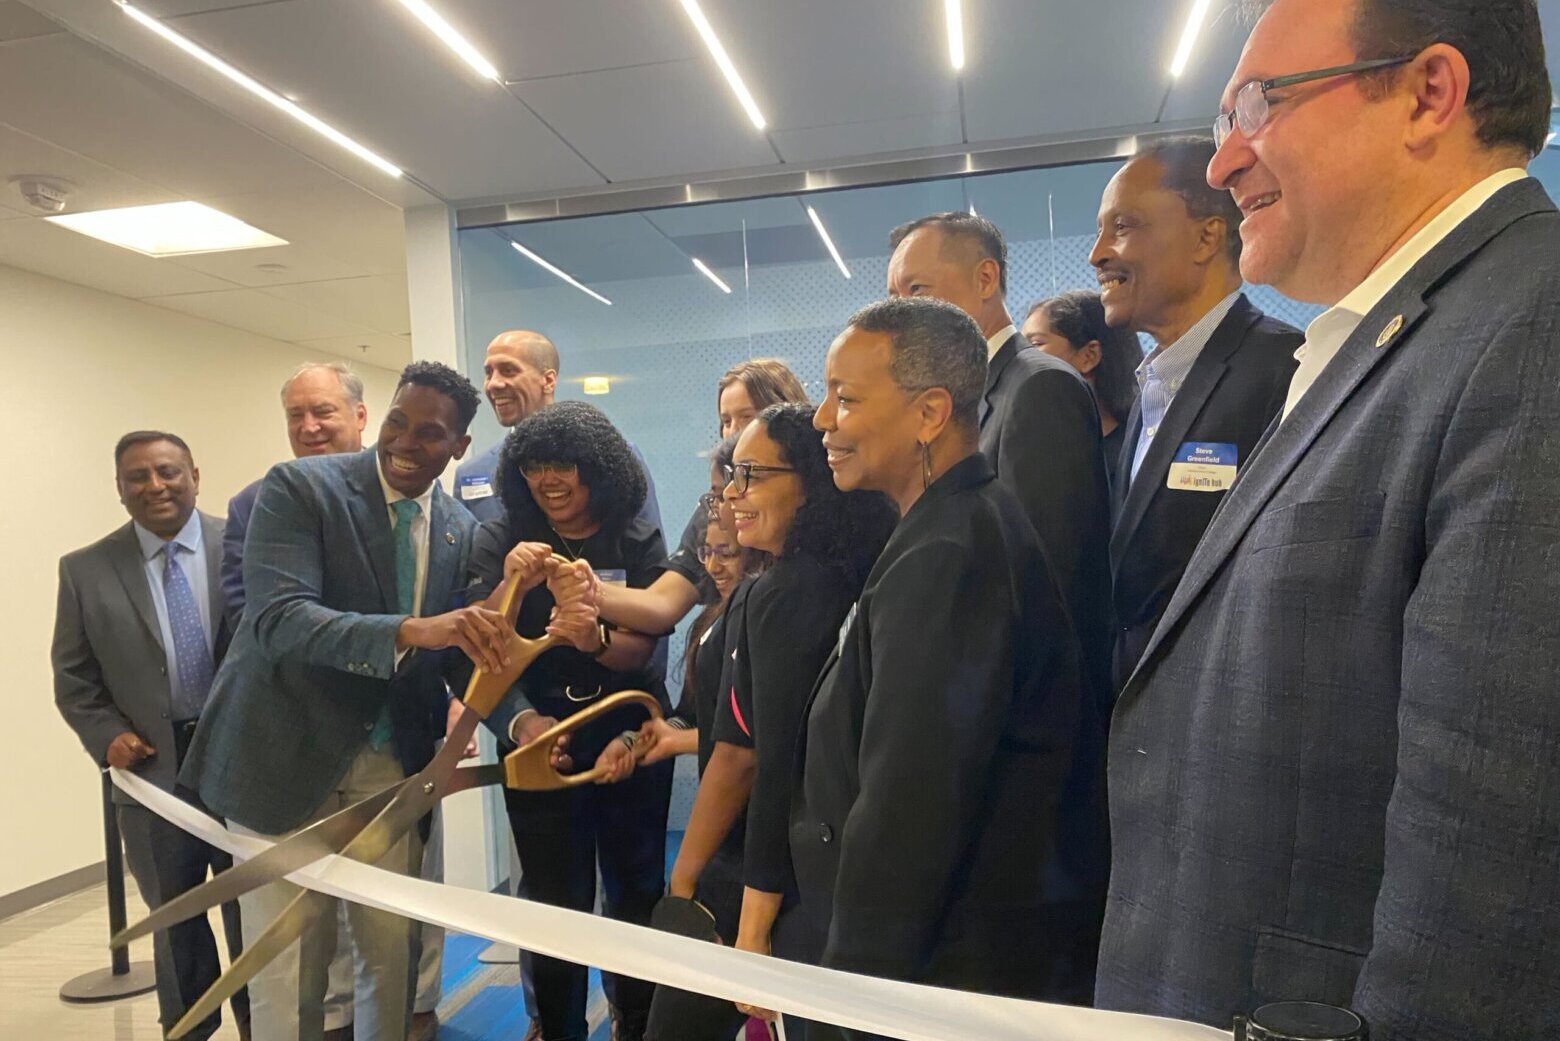 Group technology centre opens in Montgomery Co.